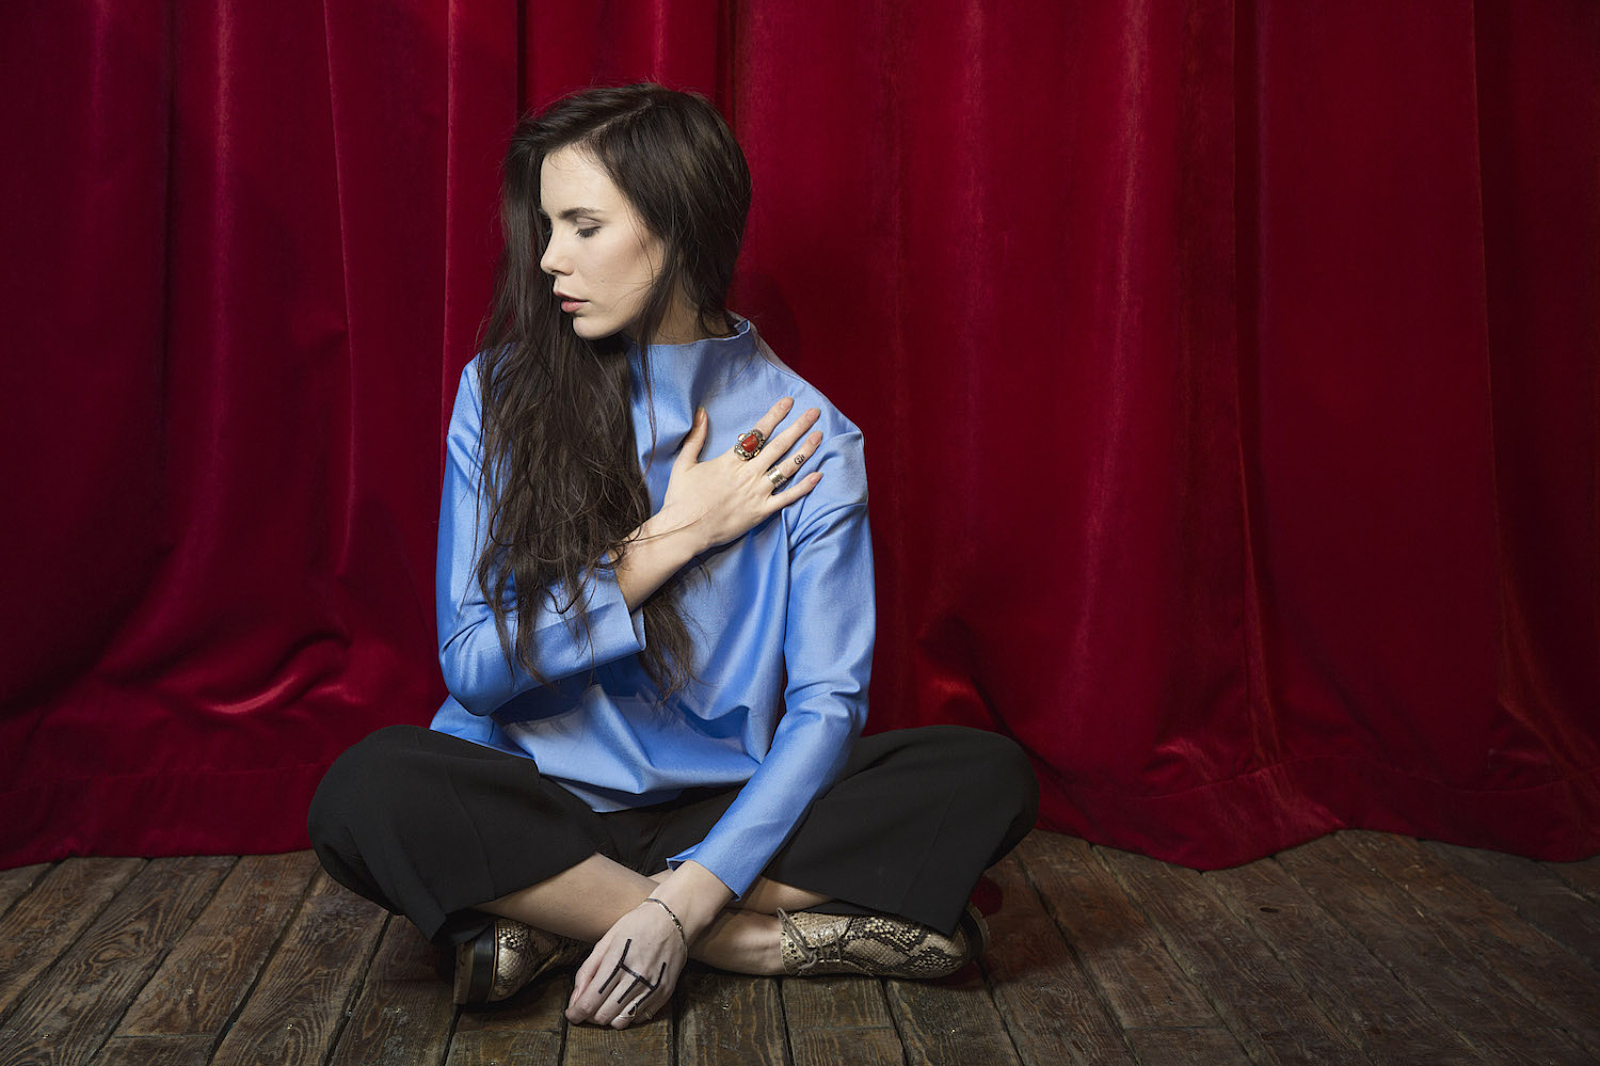 Skott shares new EP ‘Stay Off My Mind’